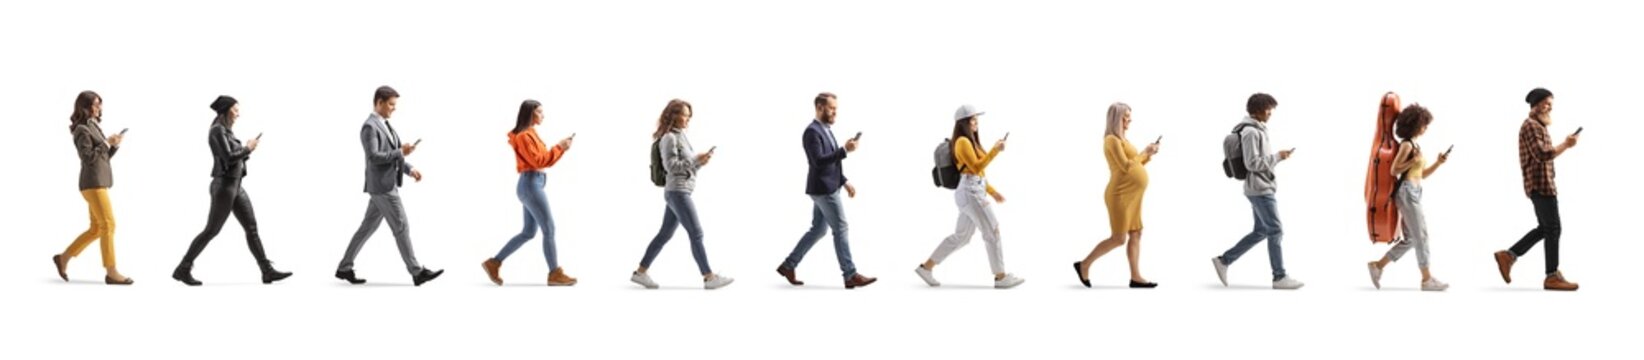 People using smartphones and walking in a line